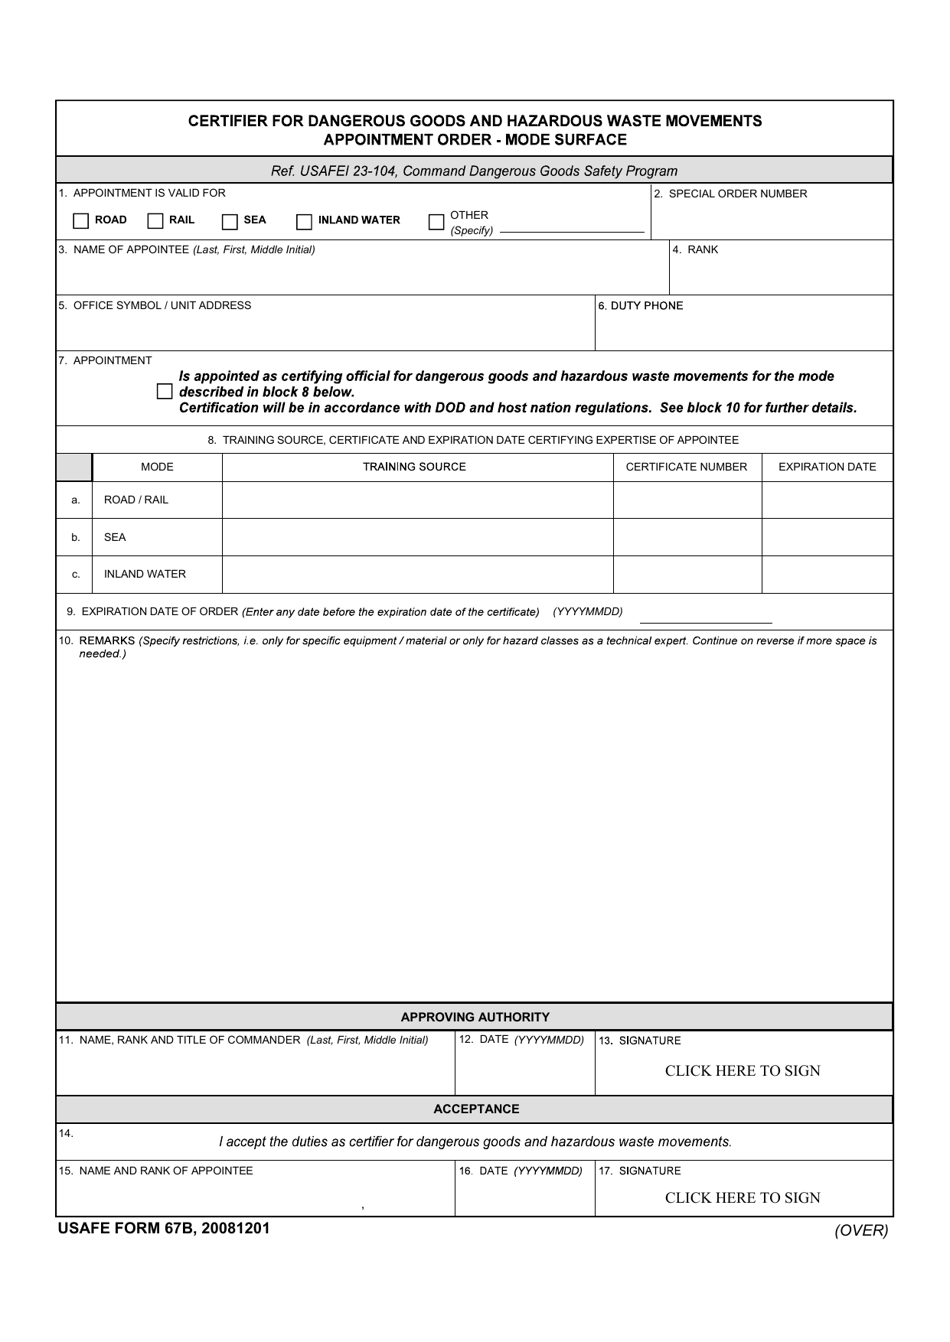 USAFE Form 67B Certifier for Dangous Goods and Hazardous Waste Movements Appointment Order - Mode Surface, Page 1